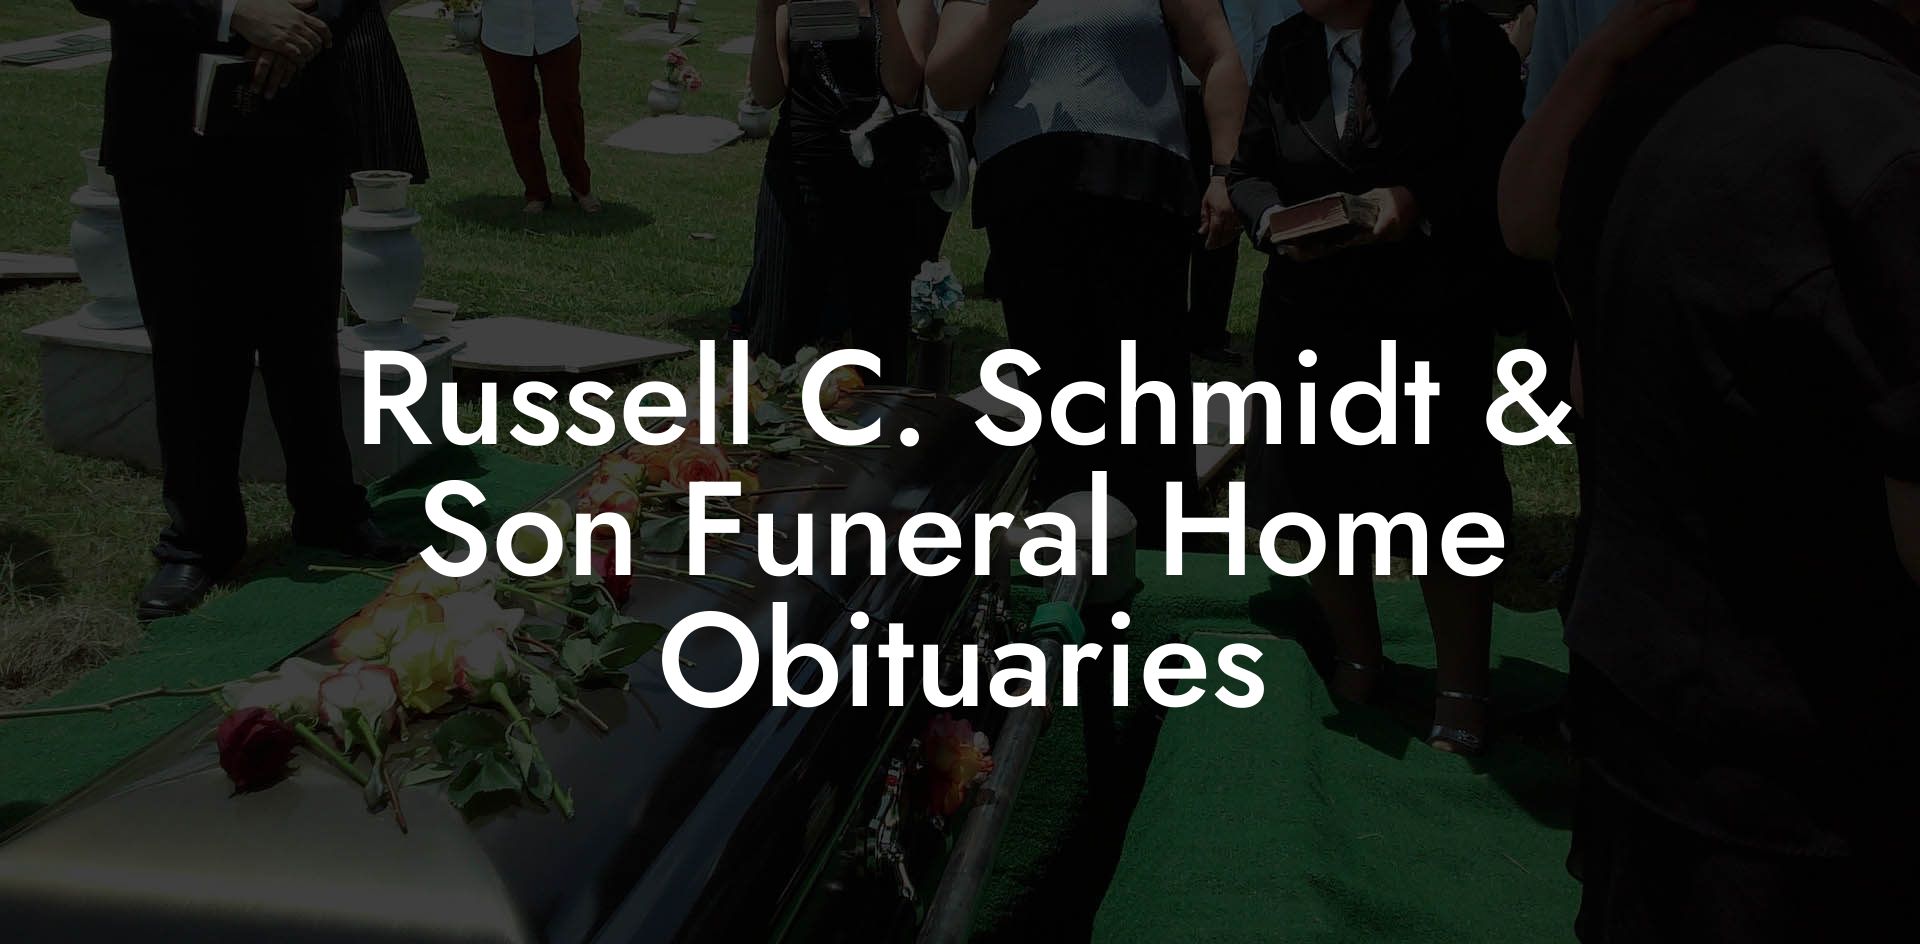 Russell C. Schmidt & Son Funeral Home Obituaries